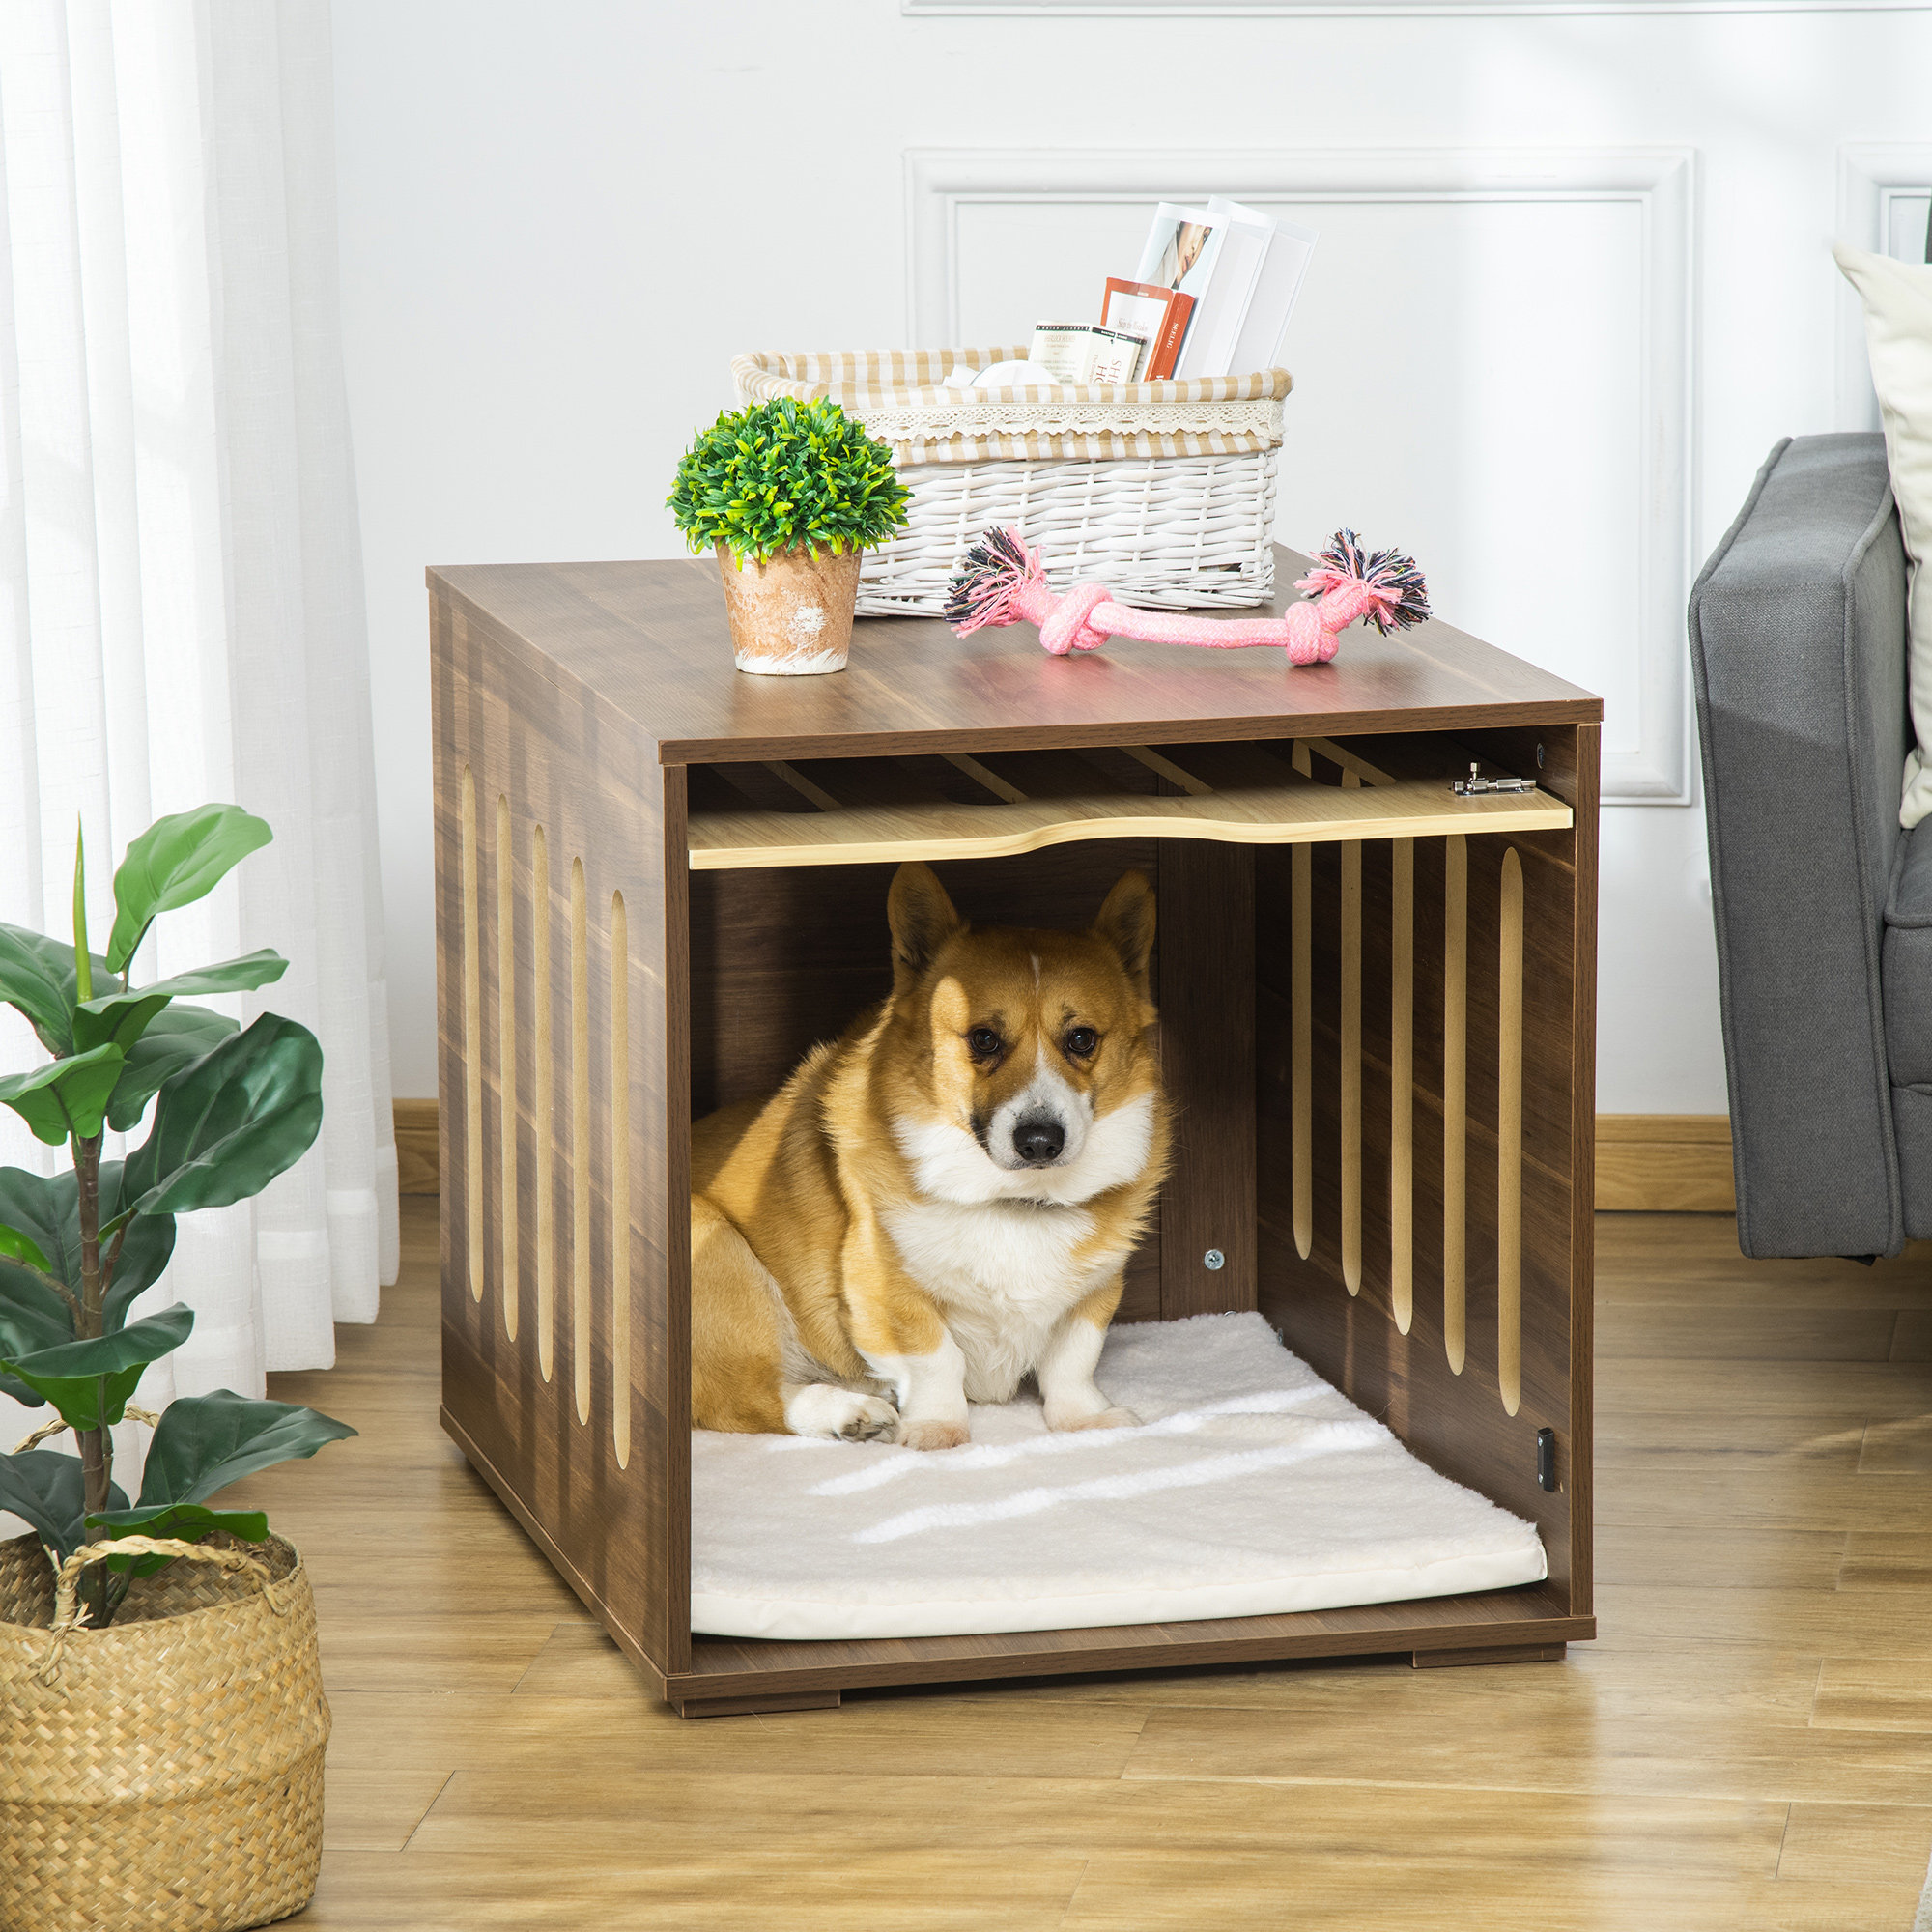 What Are Dog Crates?